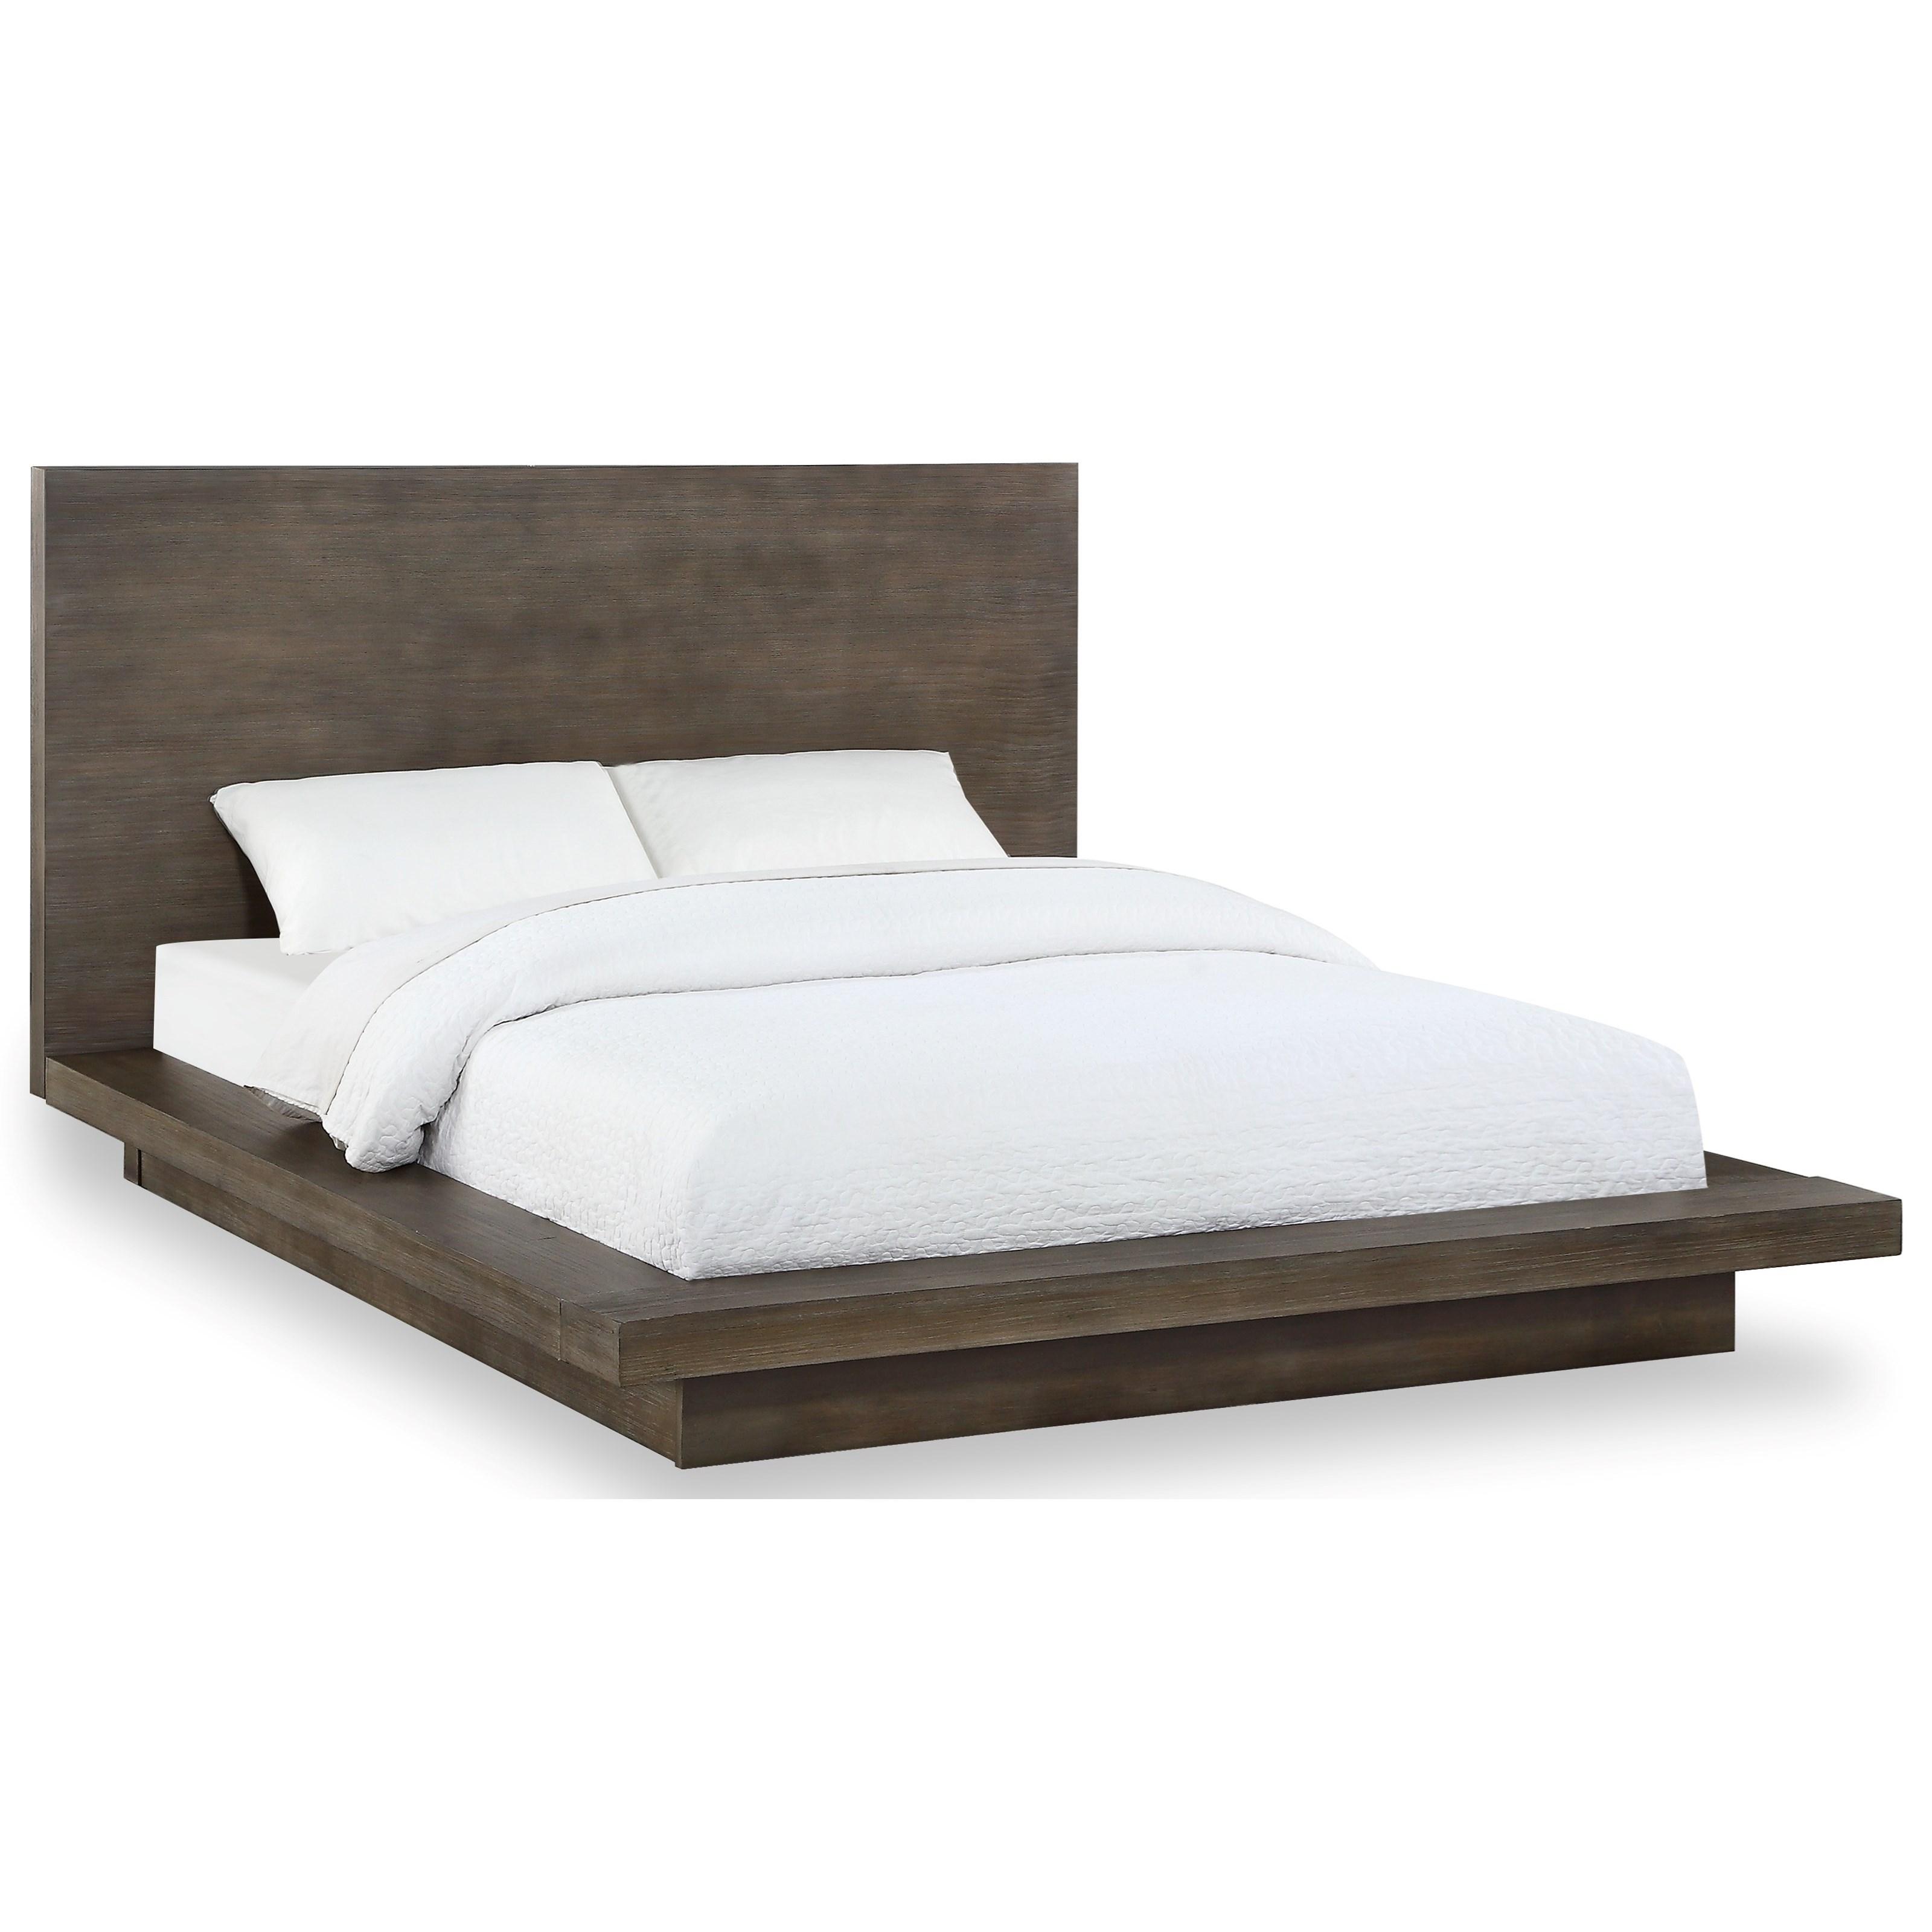 Contemporary, Rustic Platform Bed MELBOURNE 8D64H6 in Brown 